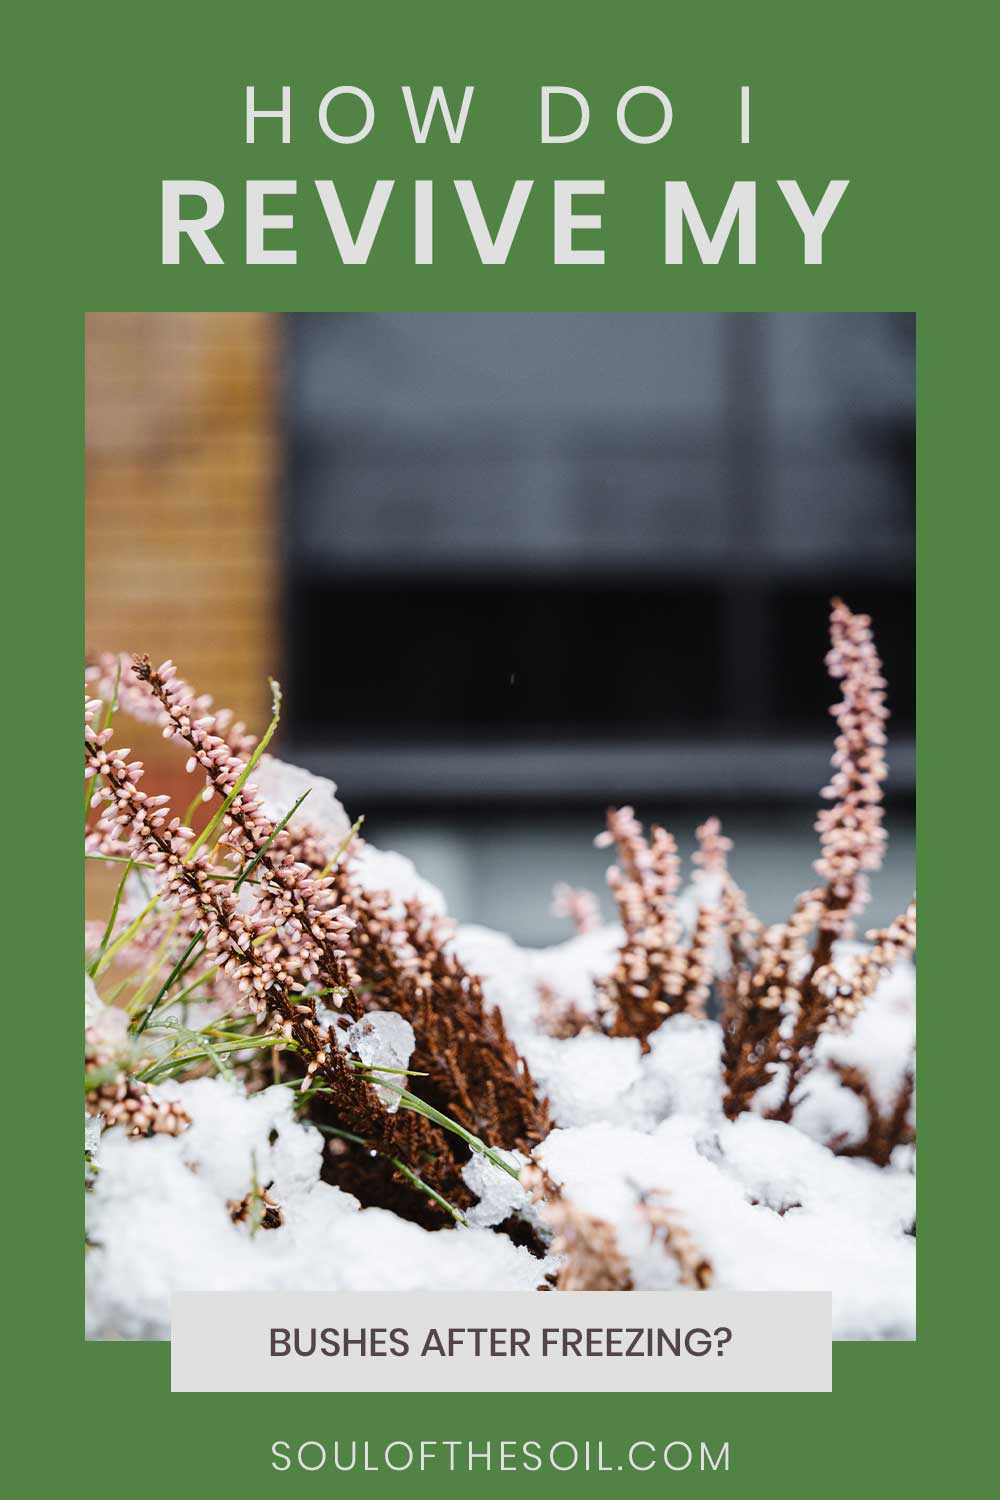 How Do I Revive My Bushes After Freezing?